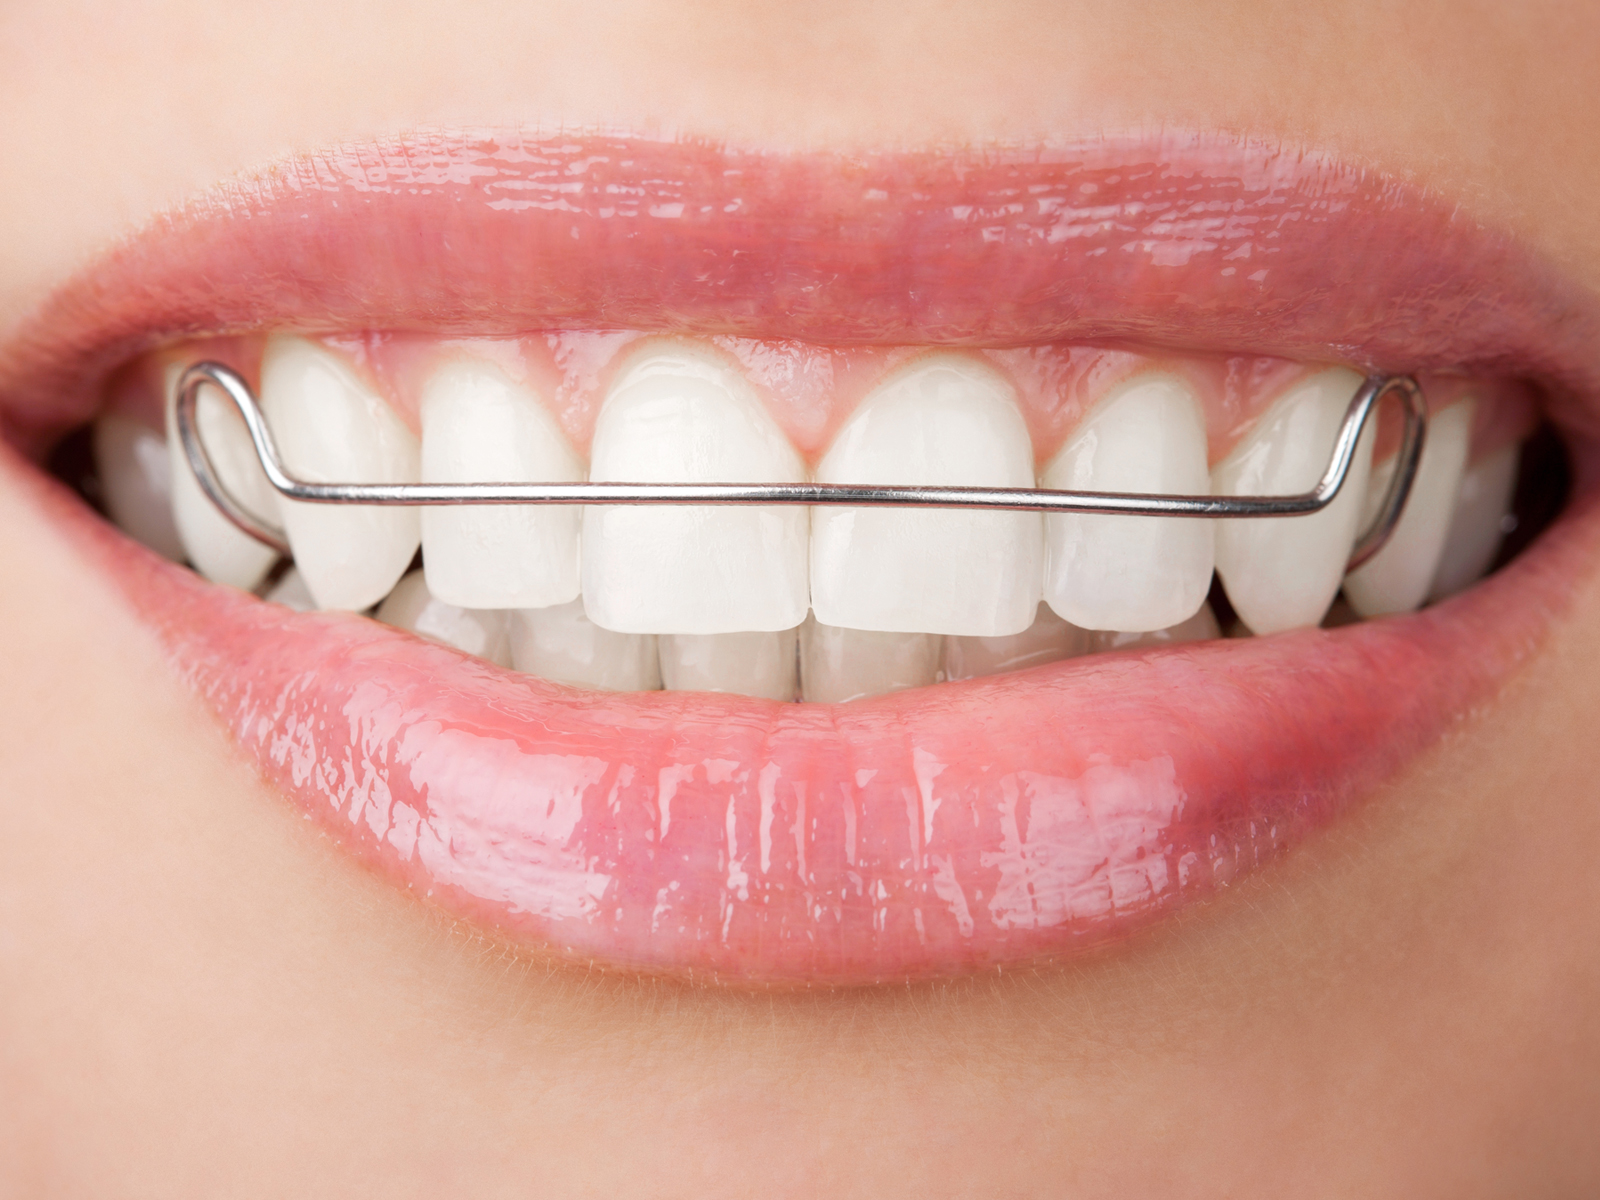 Kinds of Orthodontic Retainers That Can Protect Your New Smile